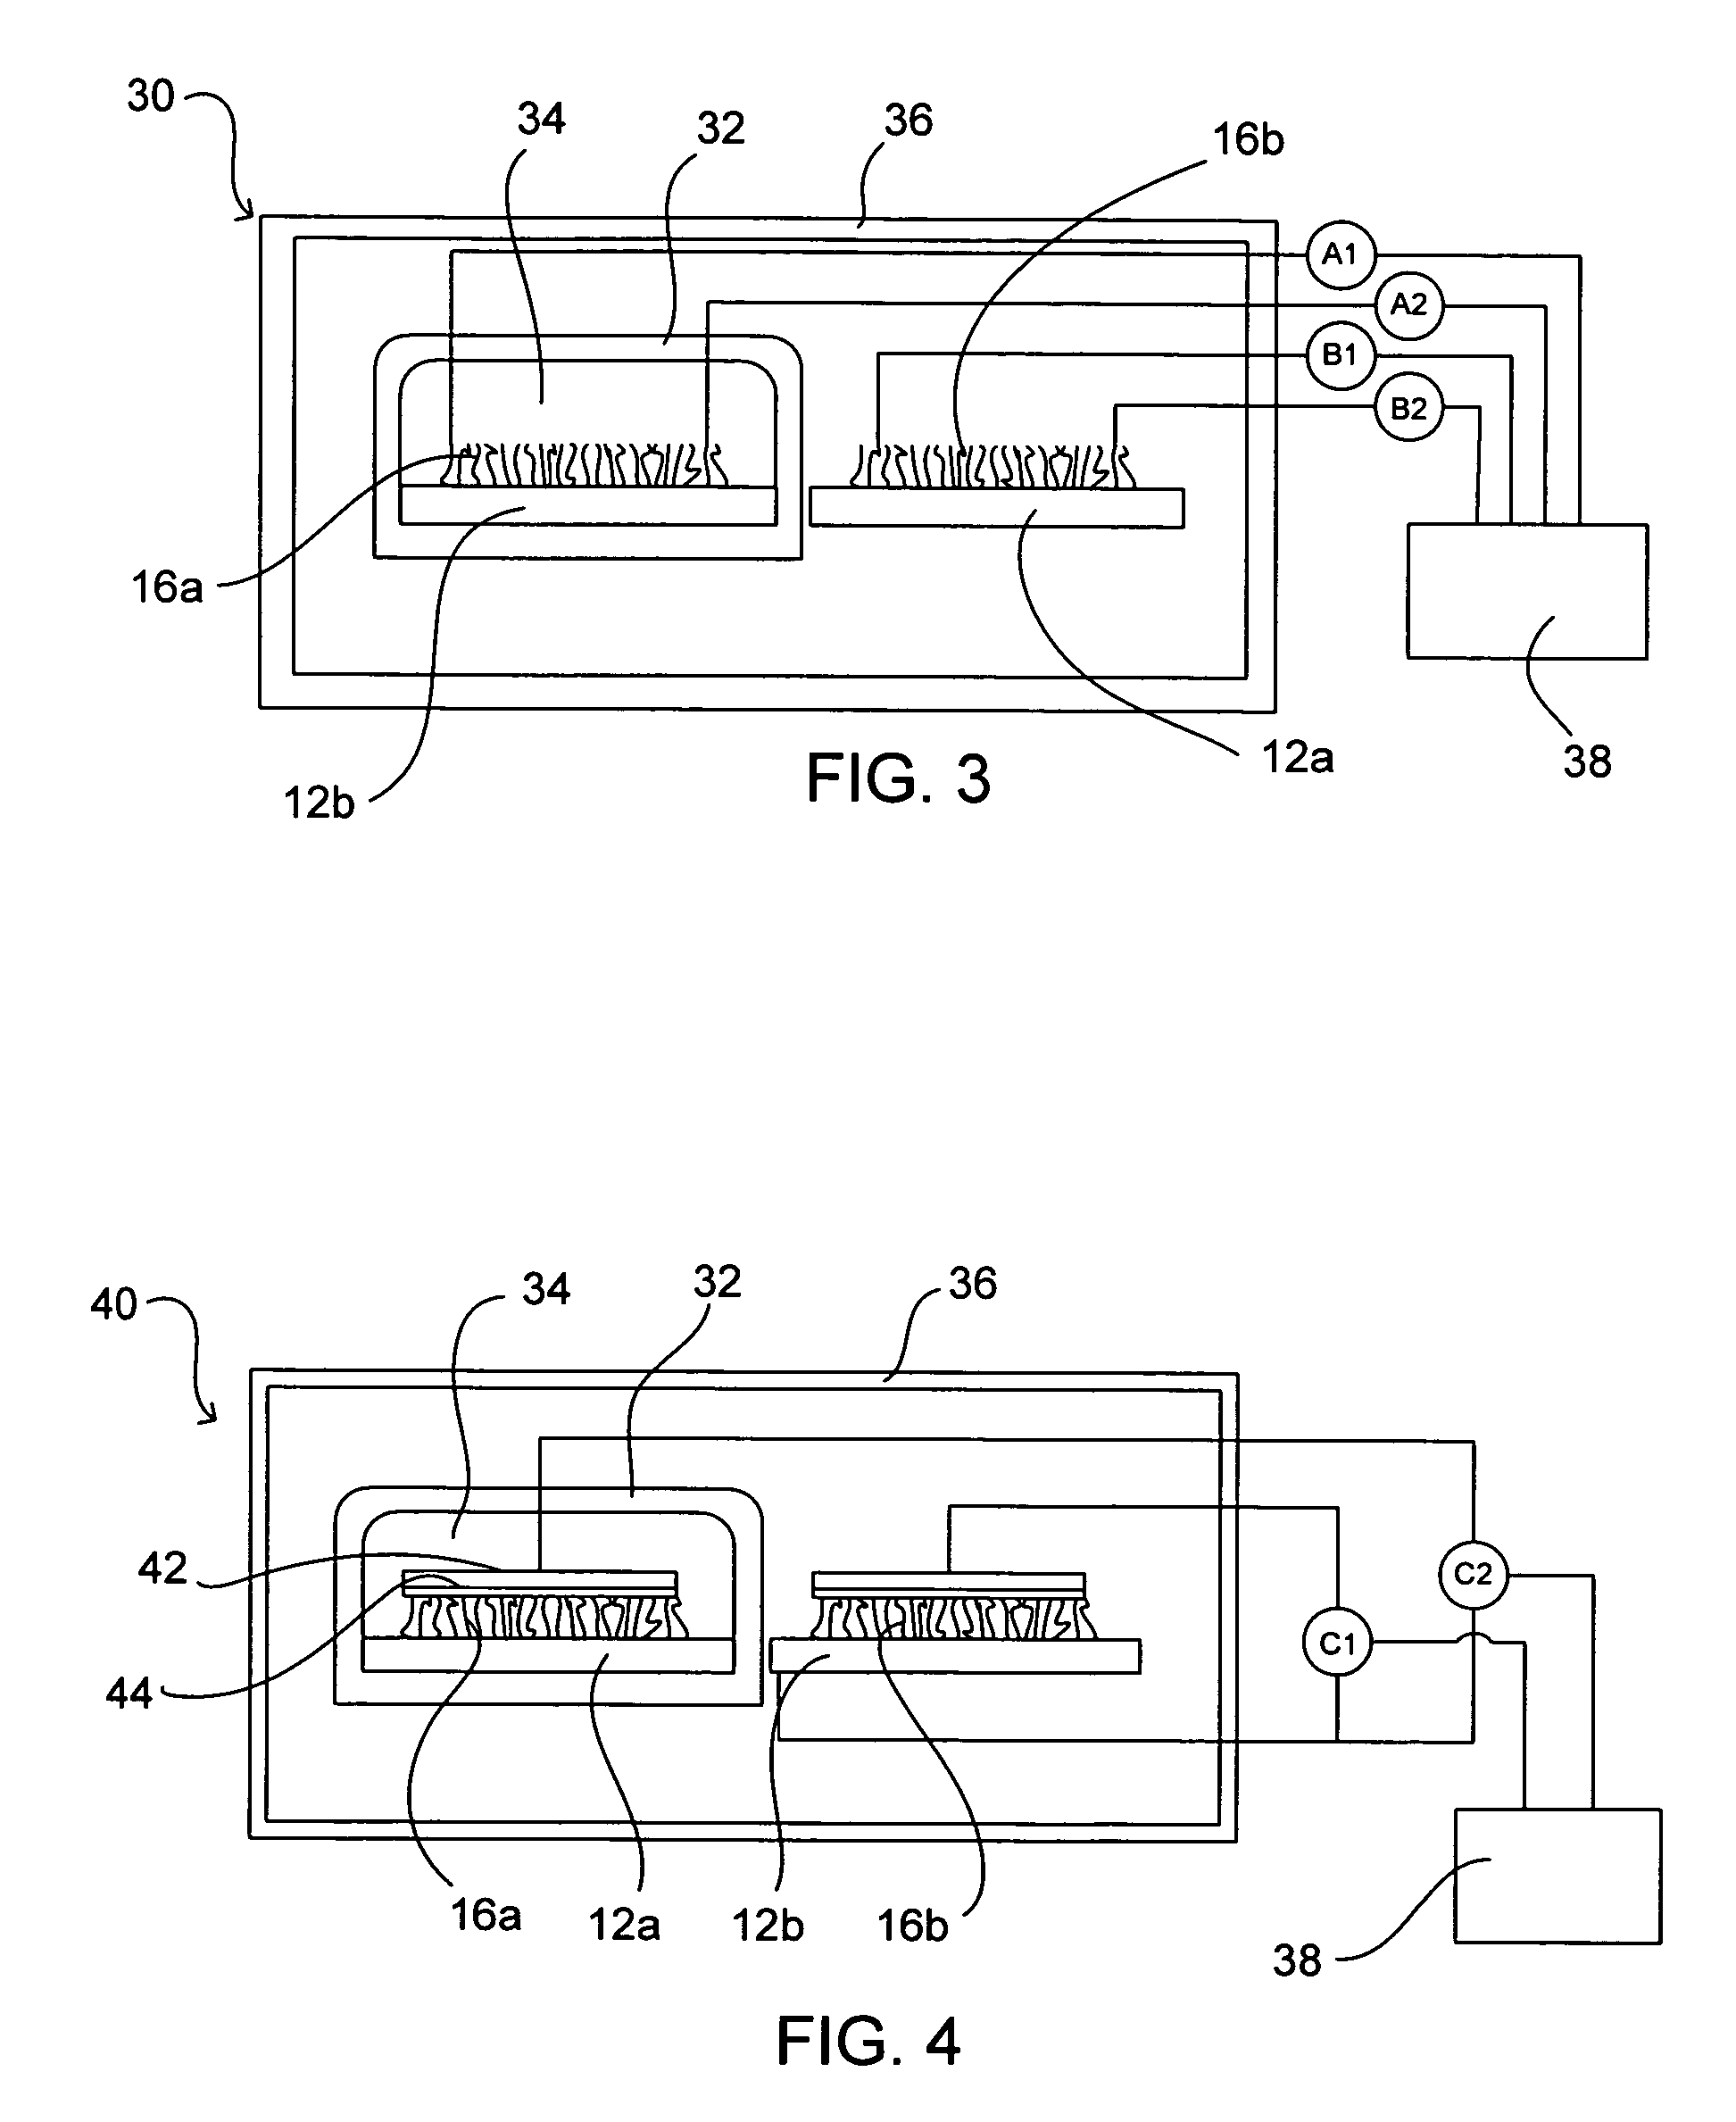 Free-standing nanowire method for detecting an analyte in a fluid